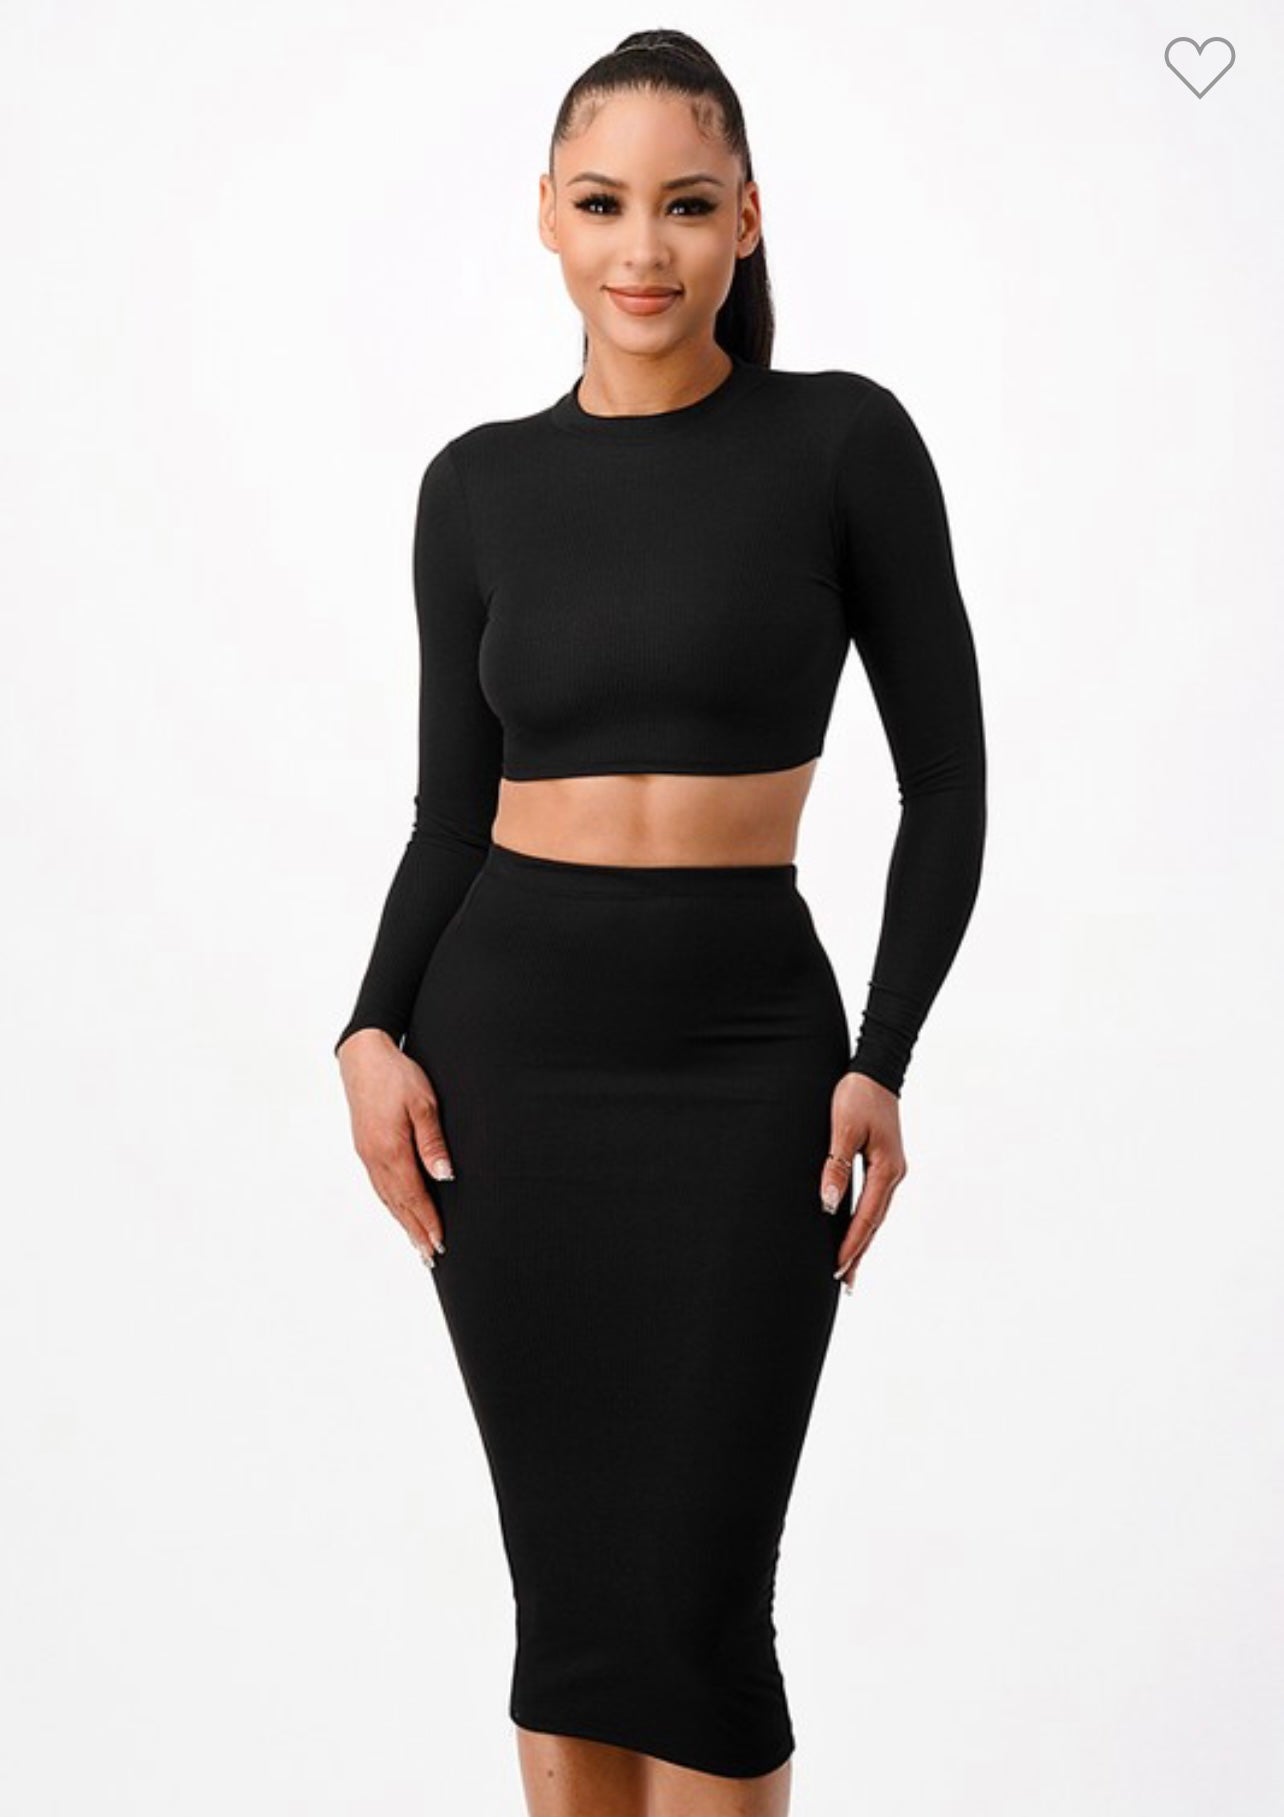 Sassy But Classy Two Piece Crop Top And Midi Skirt